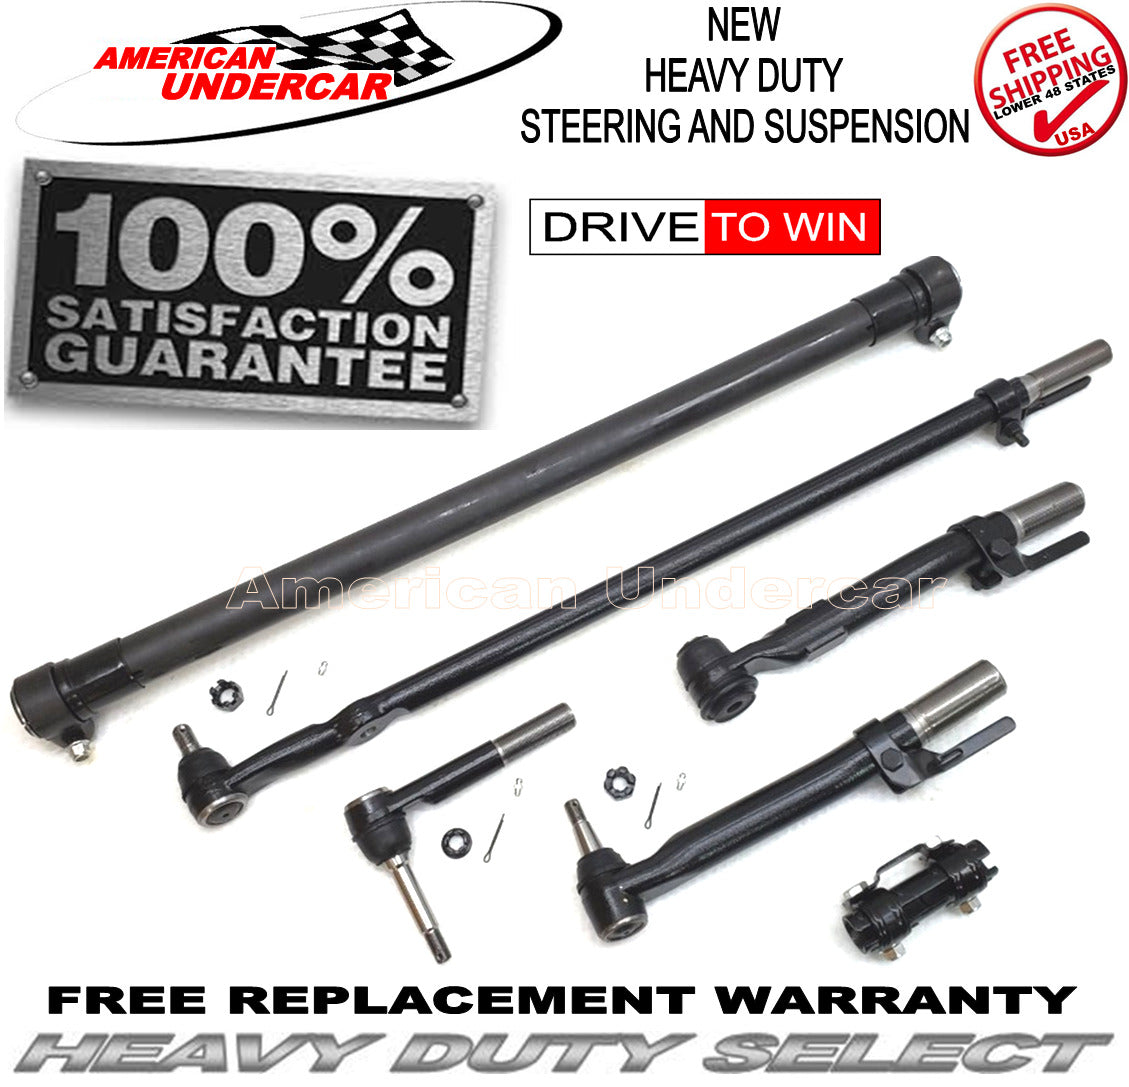 HD Tie Rod Drag Link Sleeve Steering Kit for 2005-2007 Ford F250, F350 Super Duty 4x4